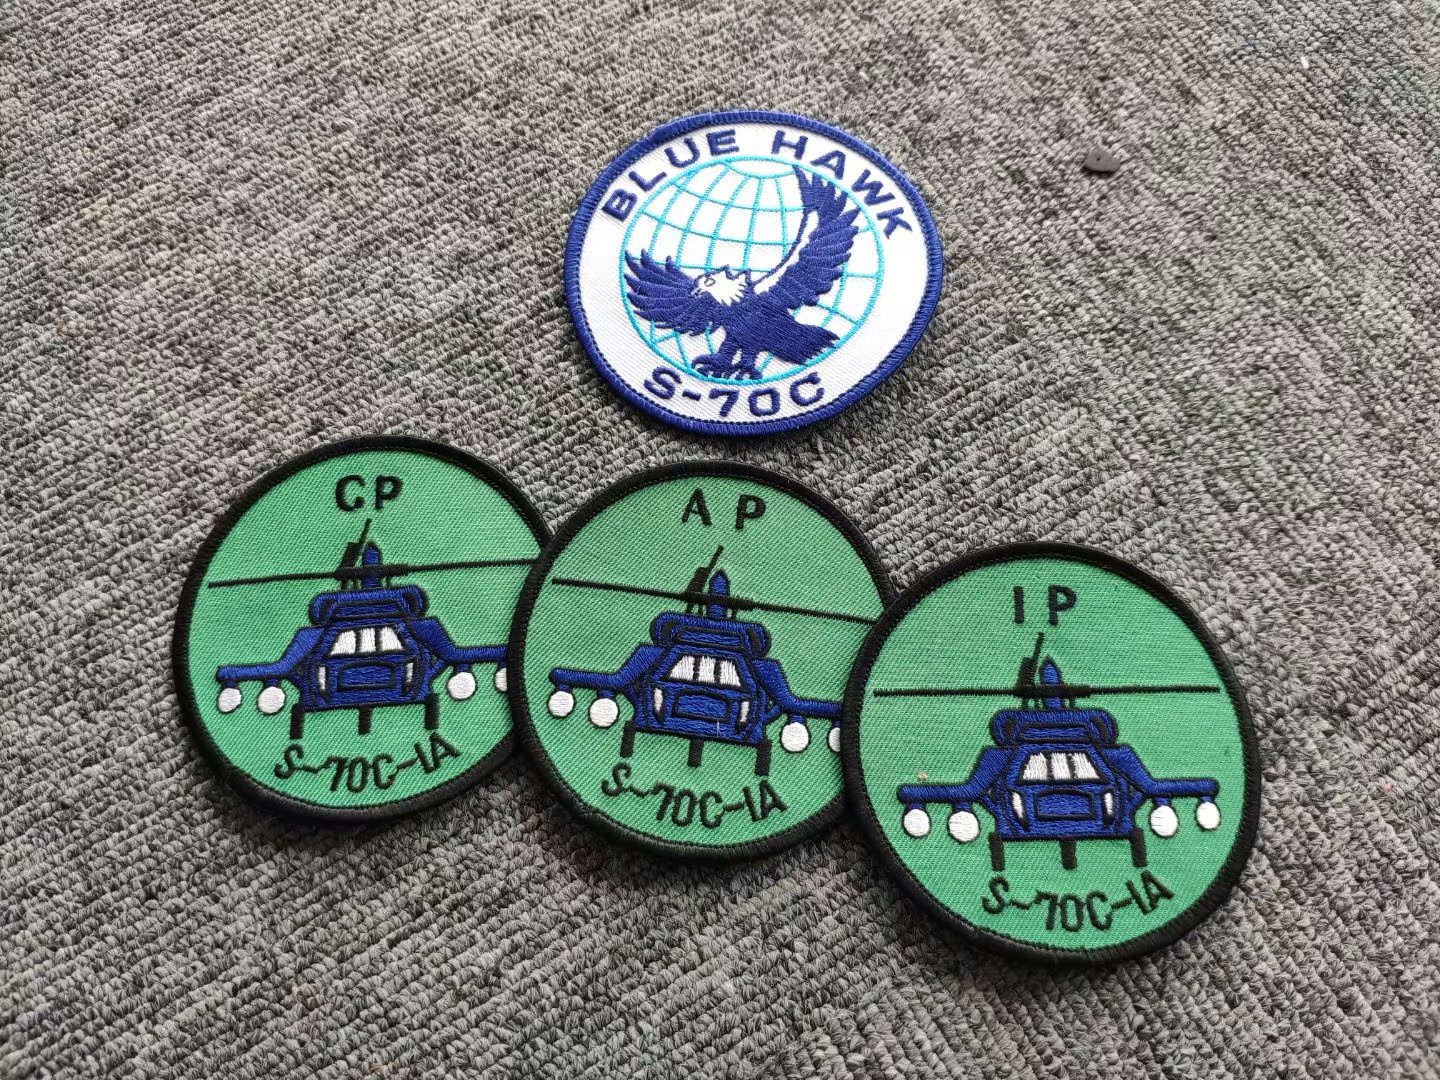 S-70C helicopter badge with a set of 4 pieces